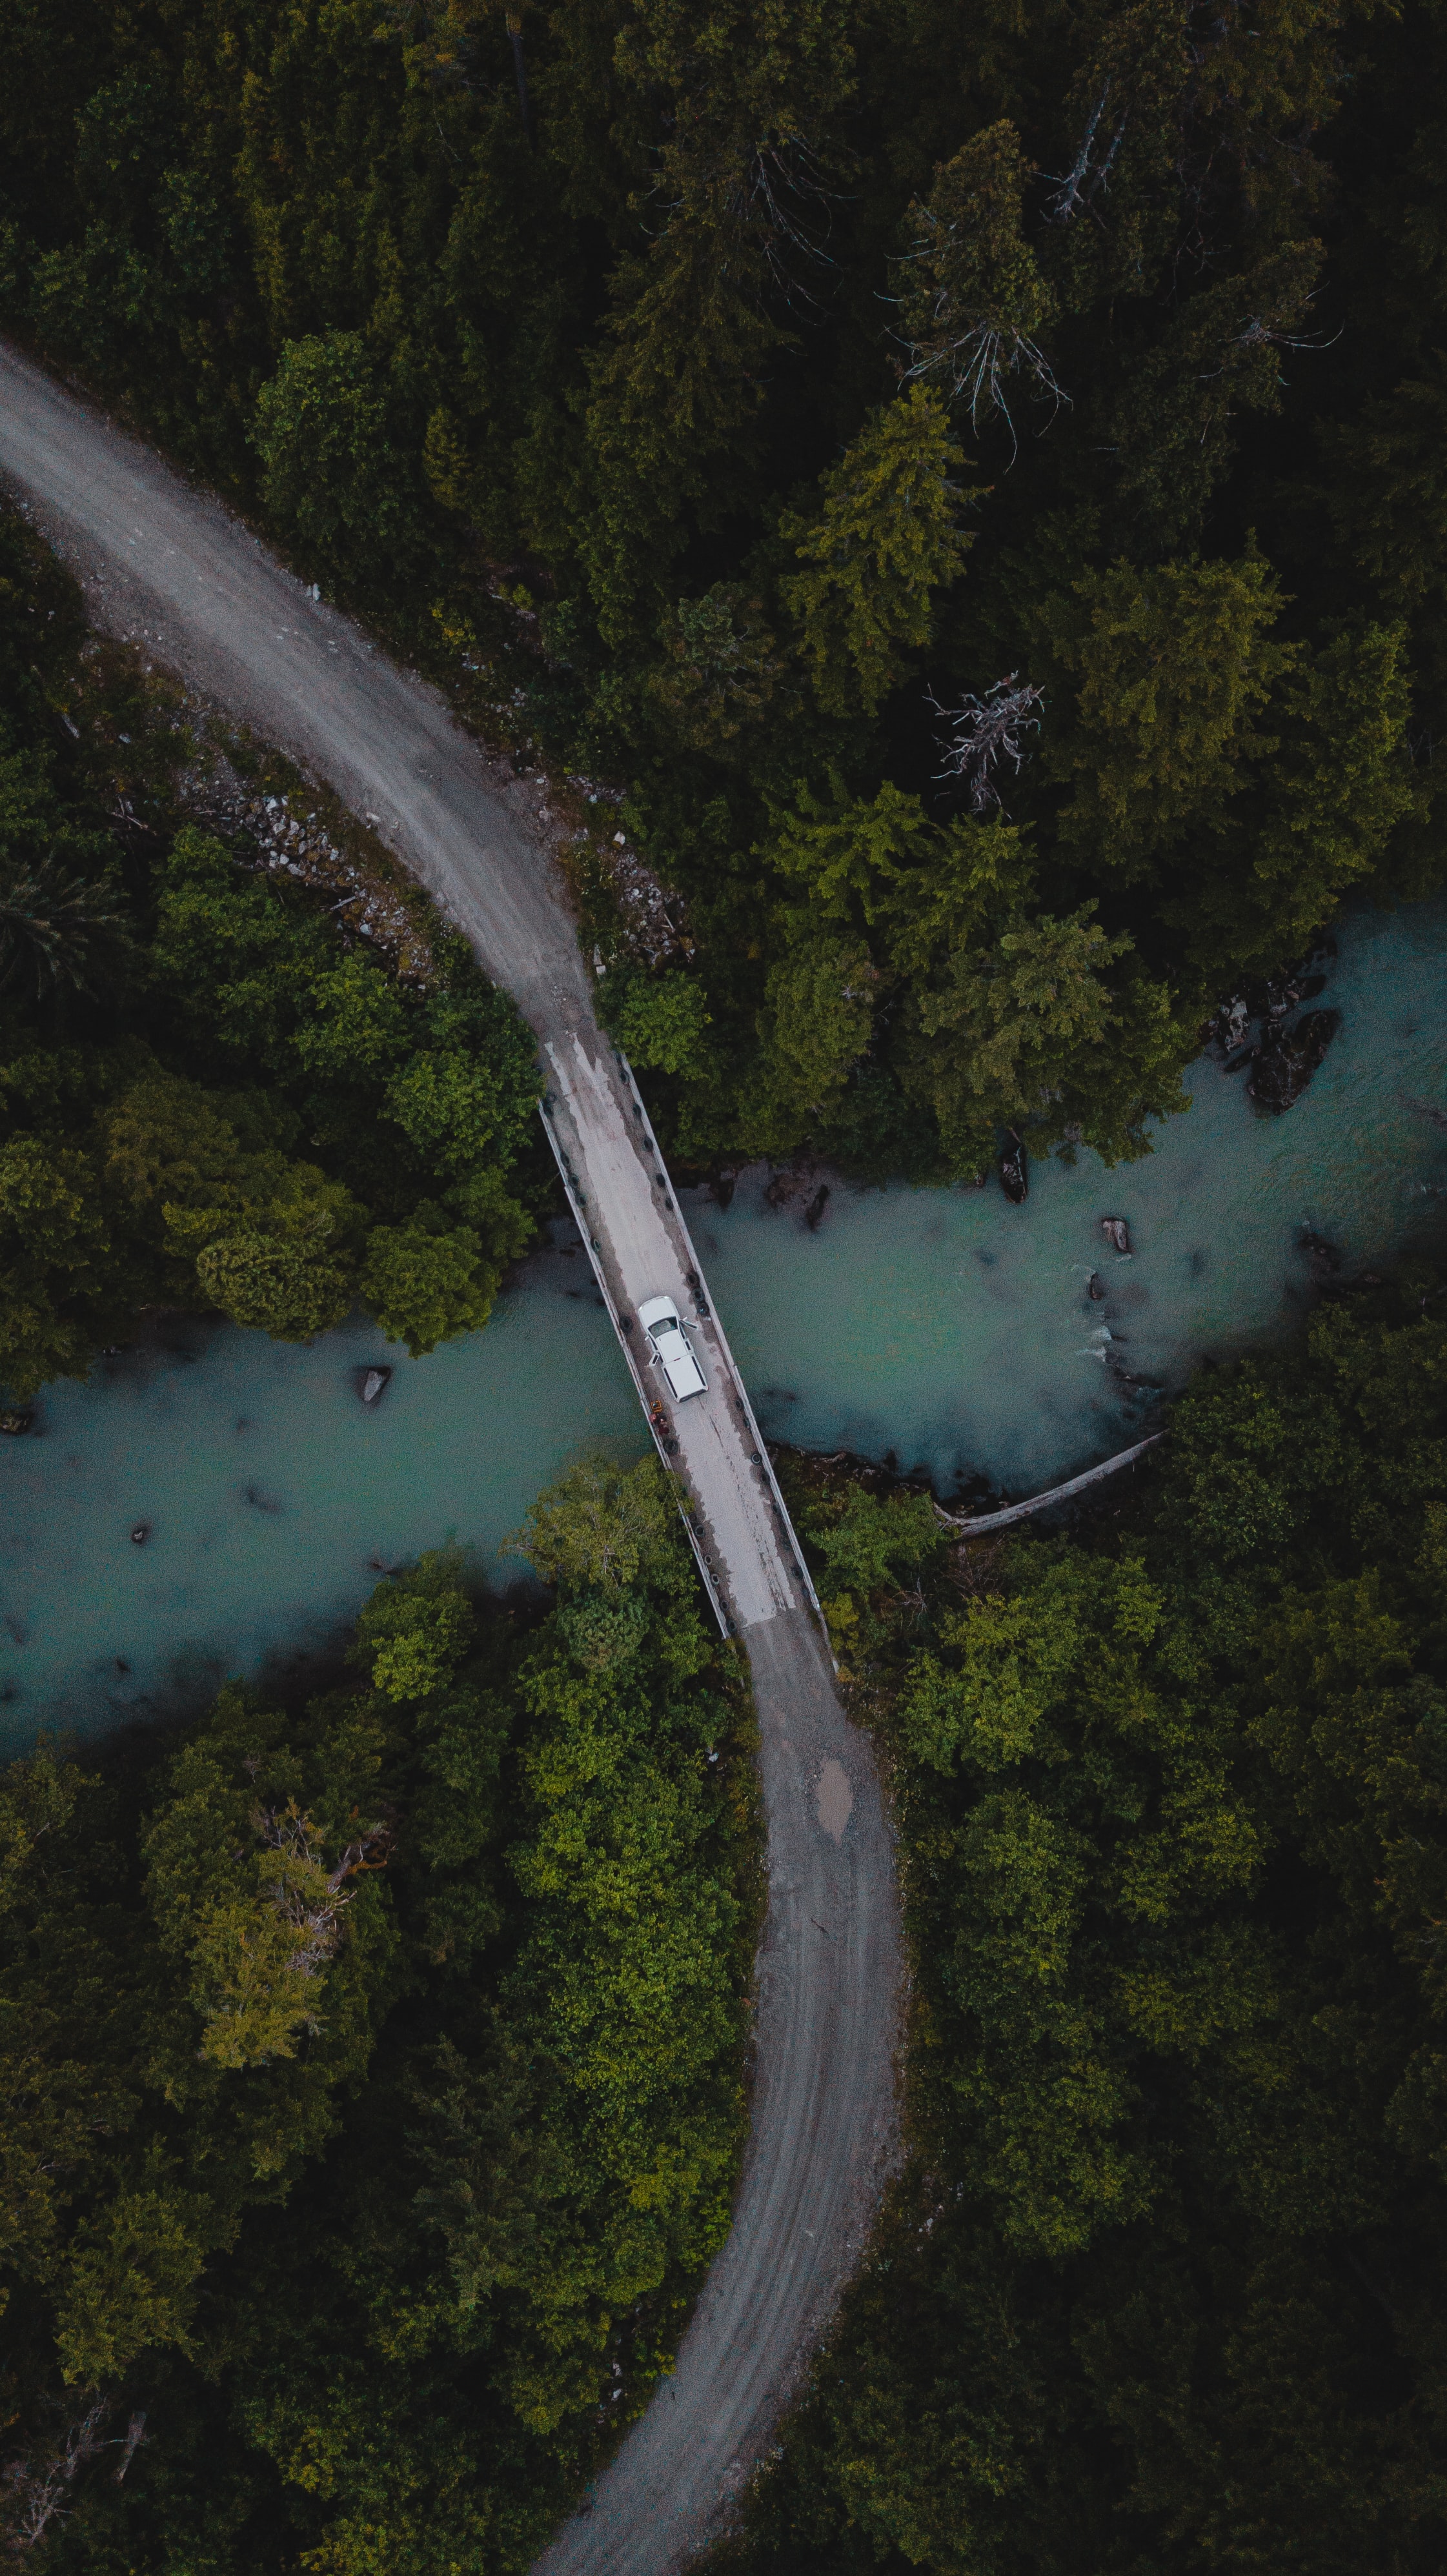 Download PC Wallpaper rivers, nature, trees, view from above, forest, car, machine, bridge